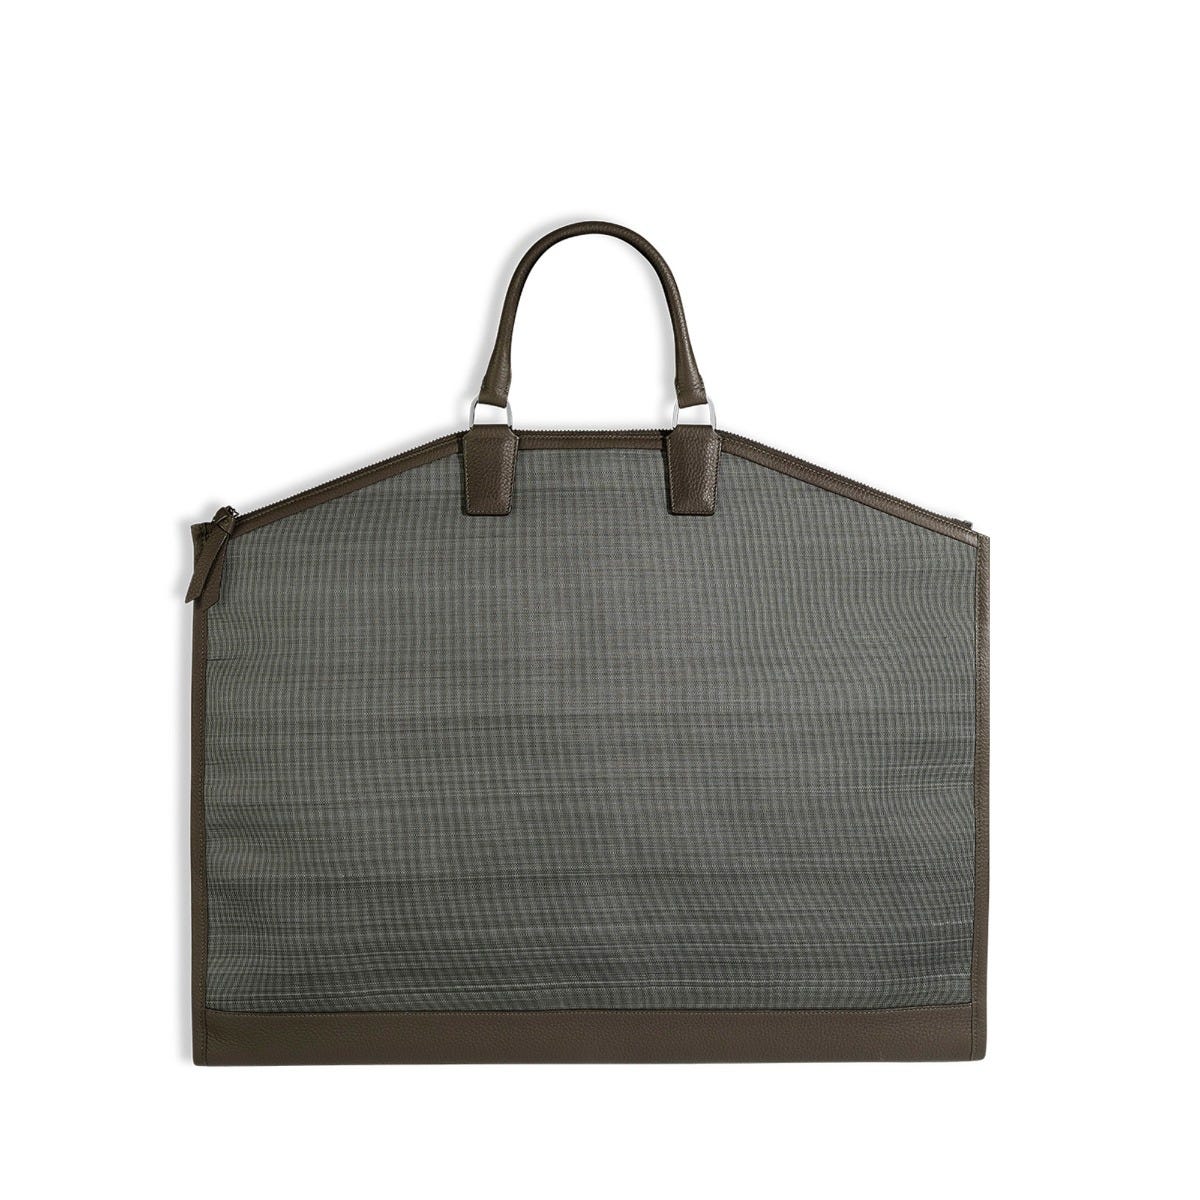 GMT Suit Bag in Horsehair & Soft Grain Leather